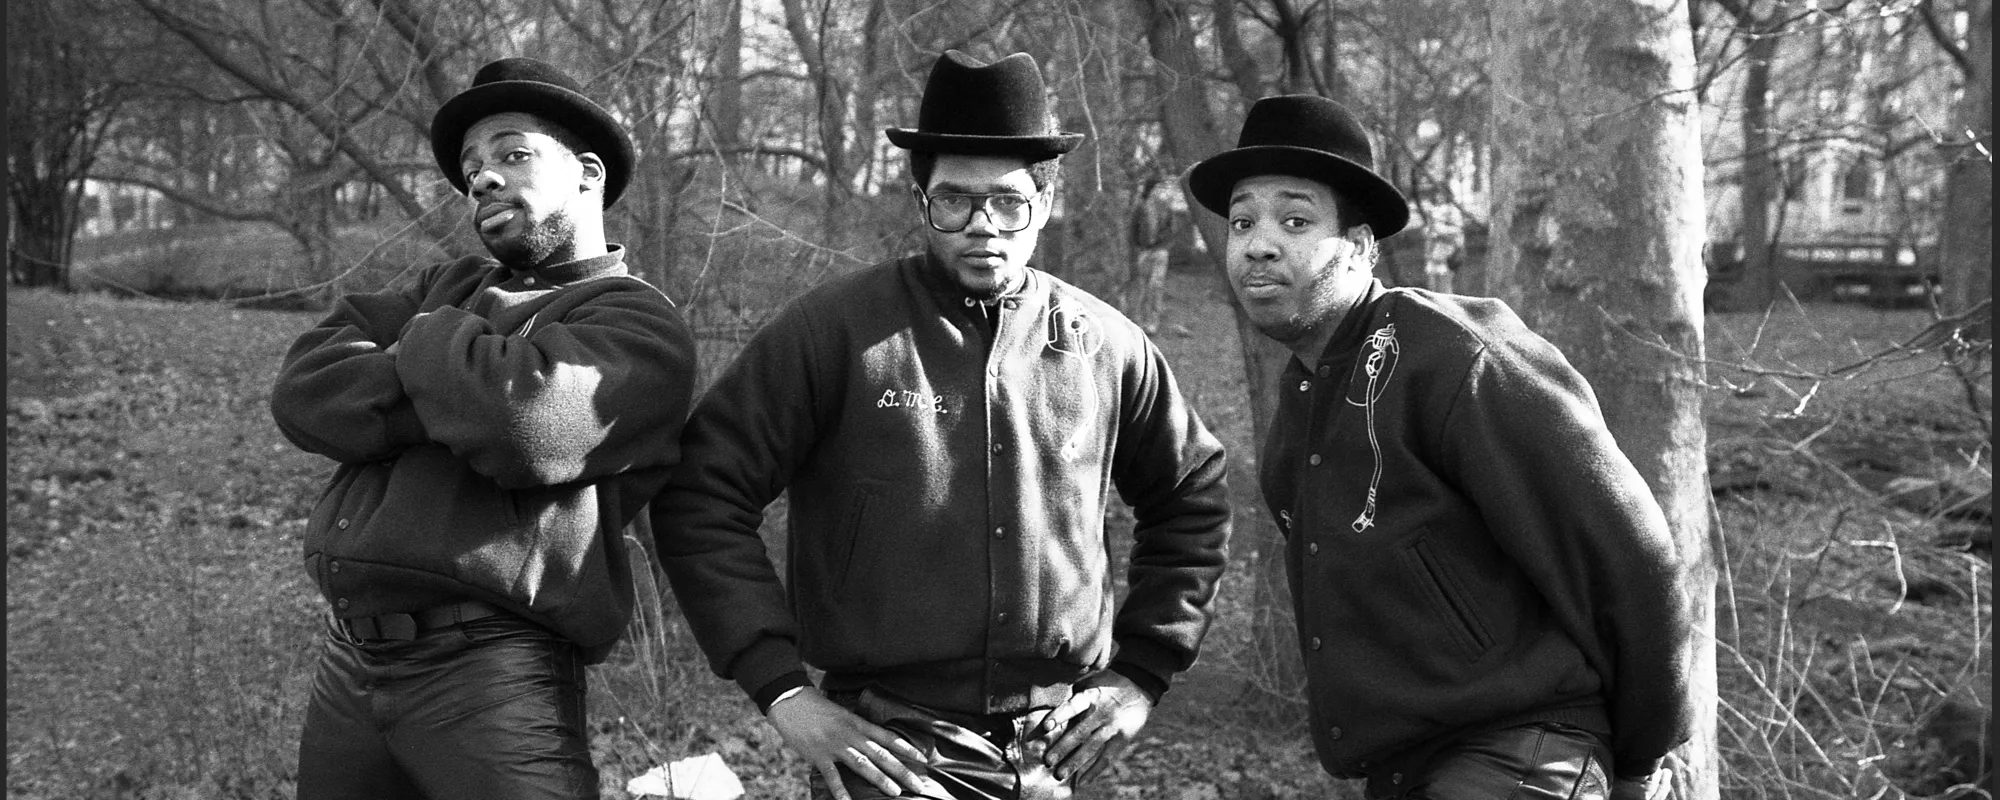 Remember When: Run-DMC Collaborated with Aerosmith on “Walk This Way”